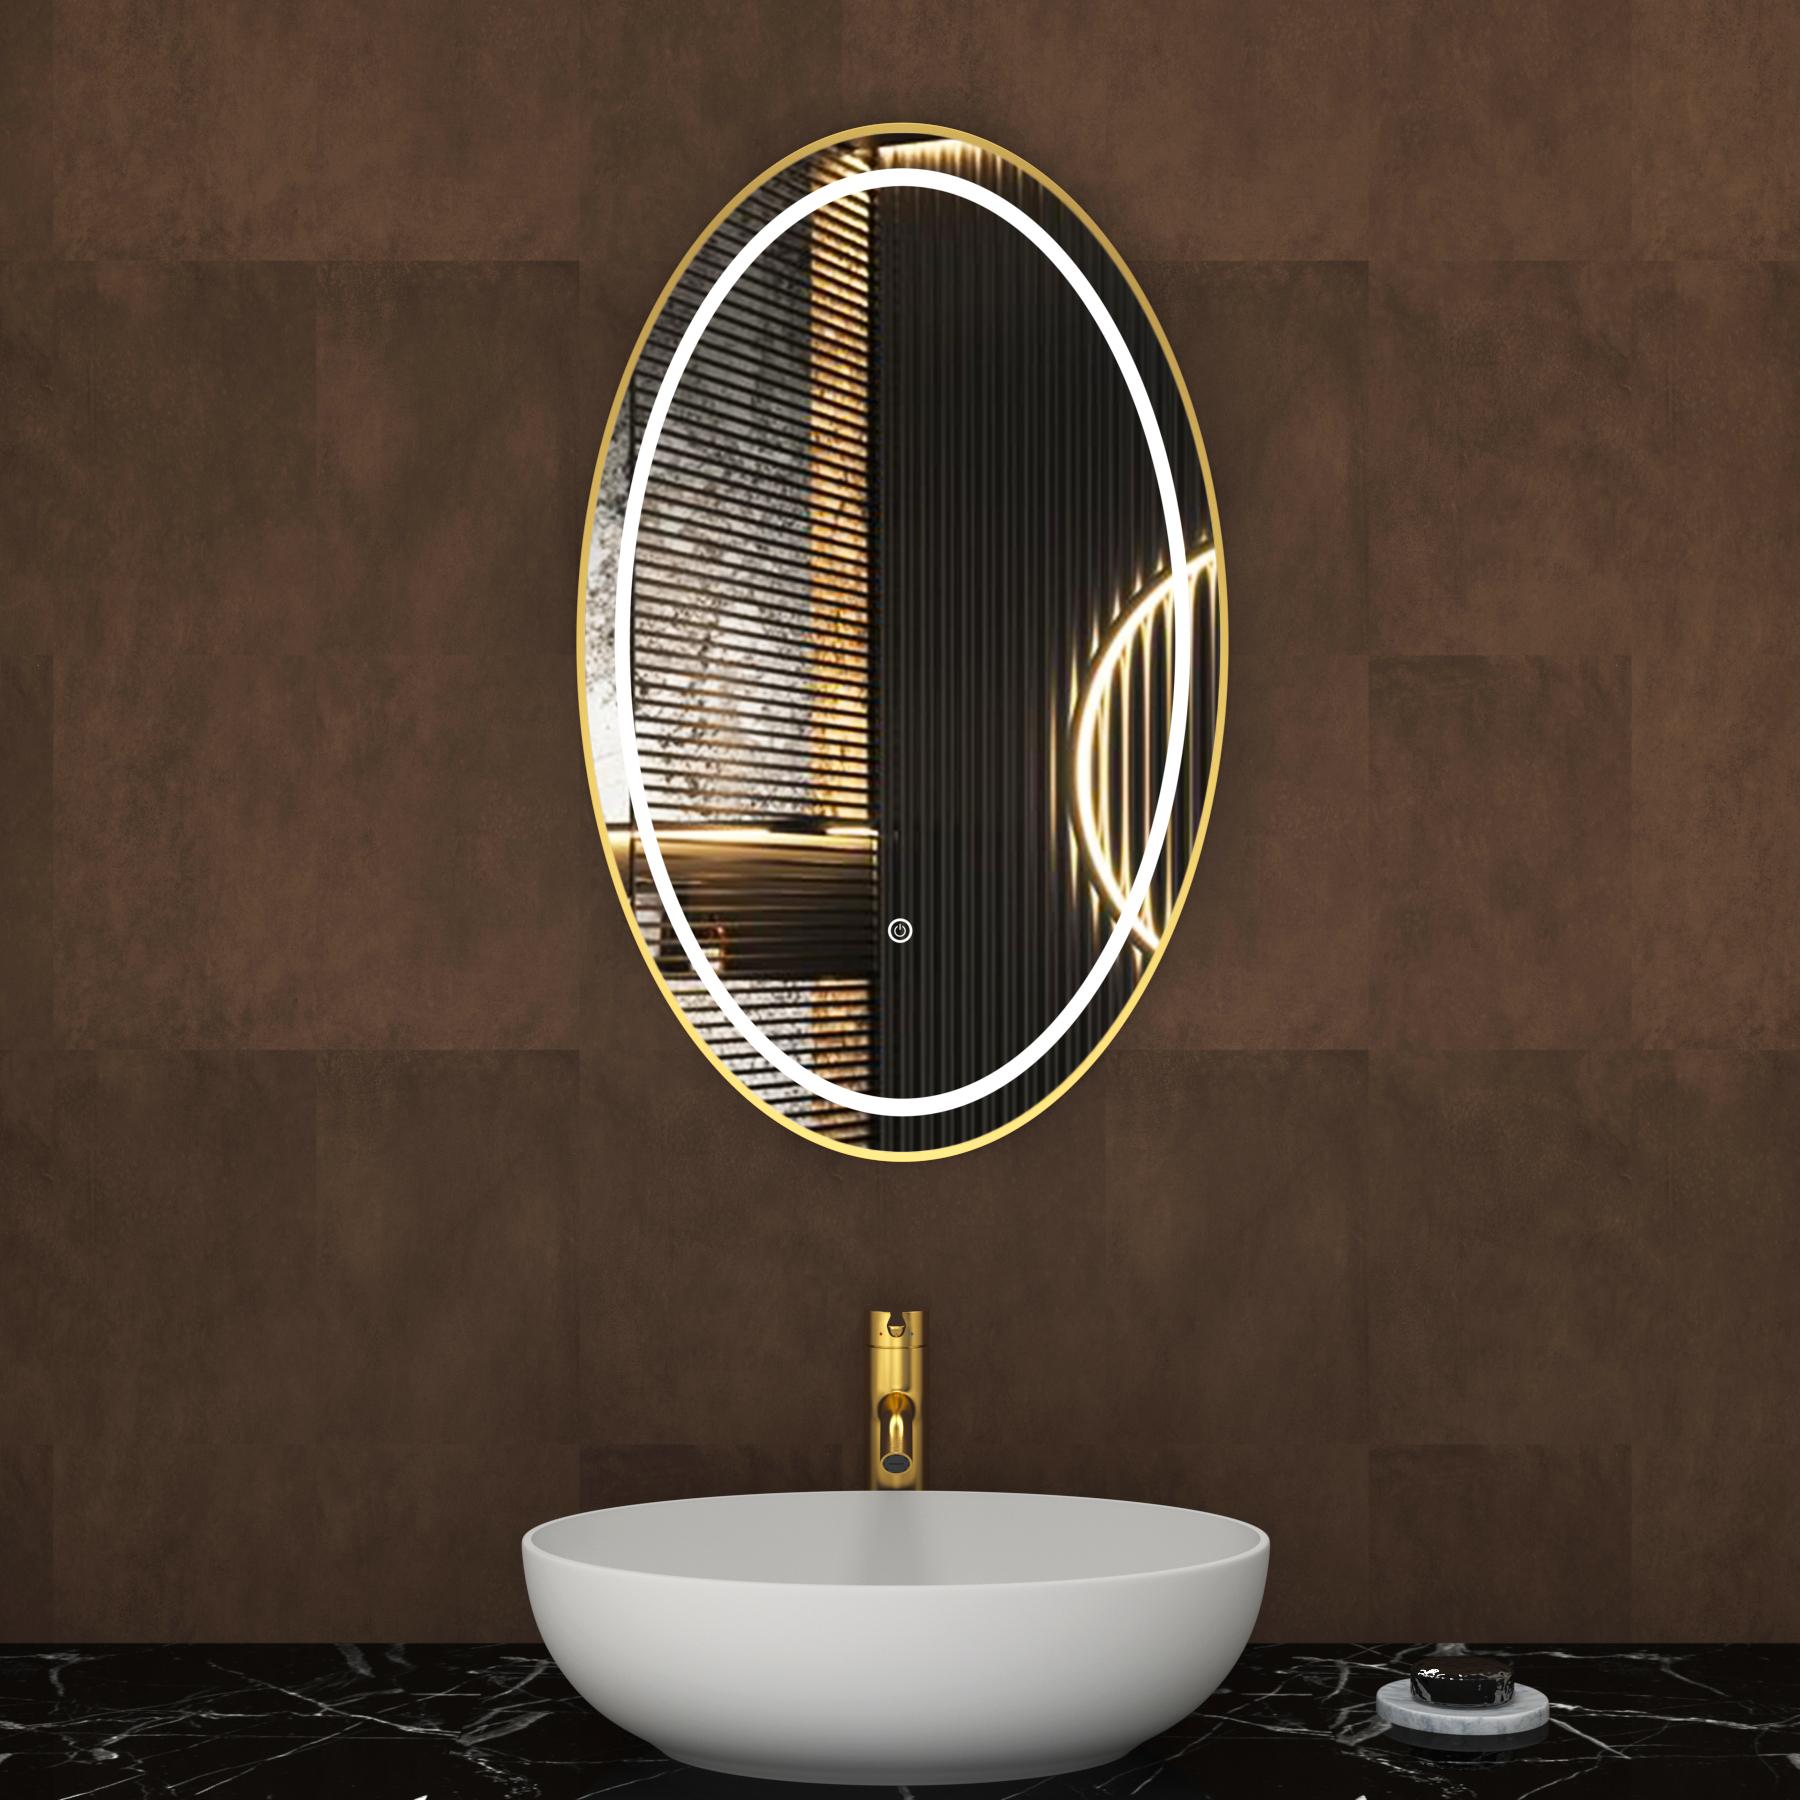 Capri 500 x 800mm Oval Front Lit LED Framed Mirror with Touch Sensor - Brushed Brass